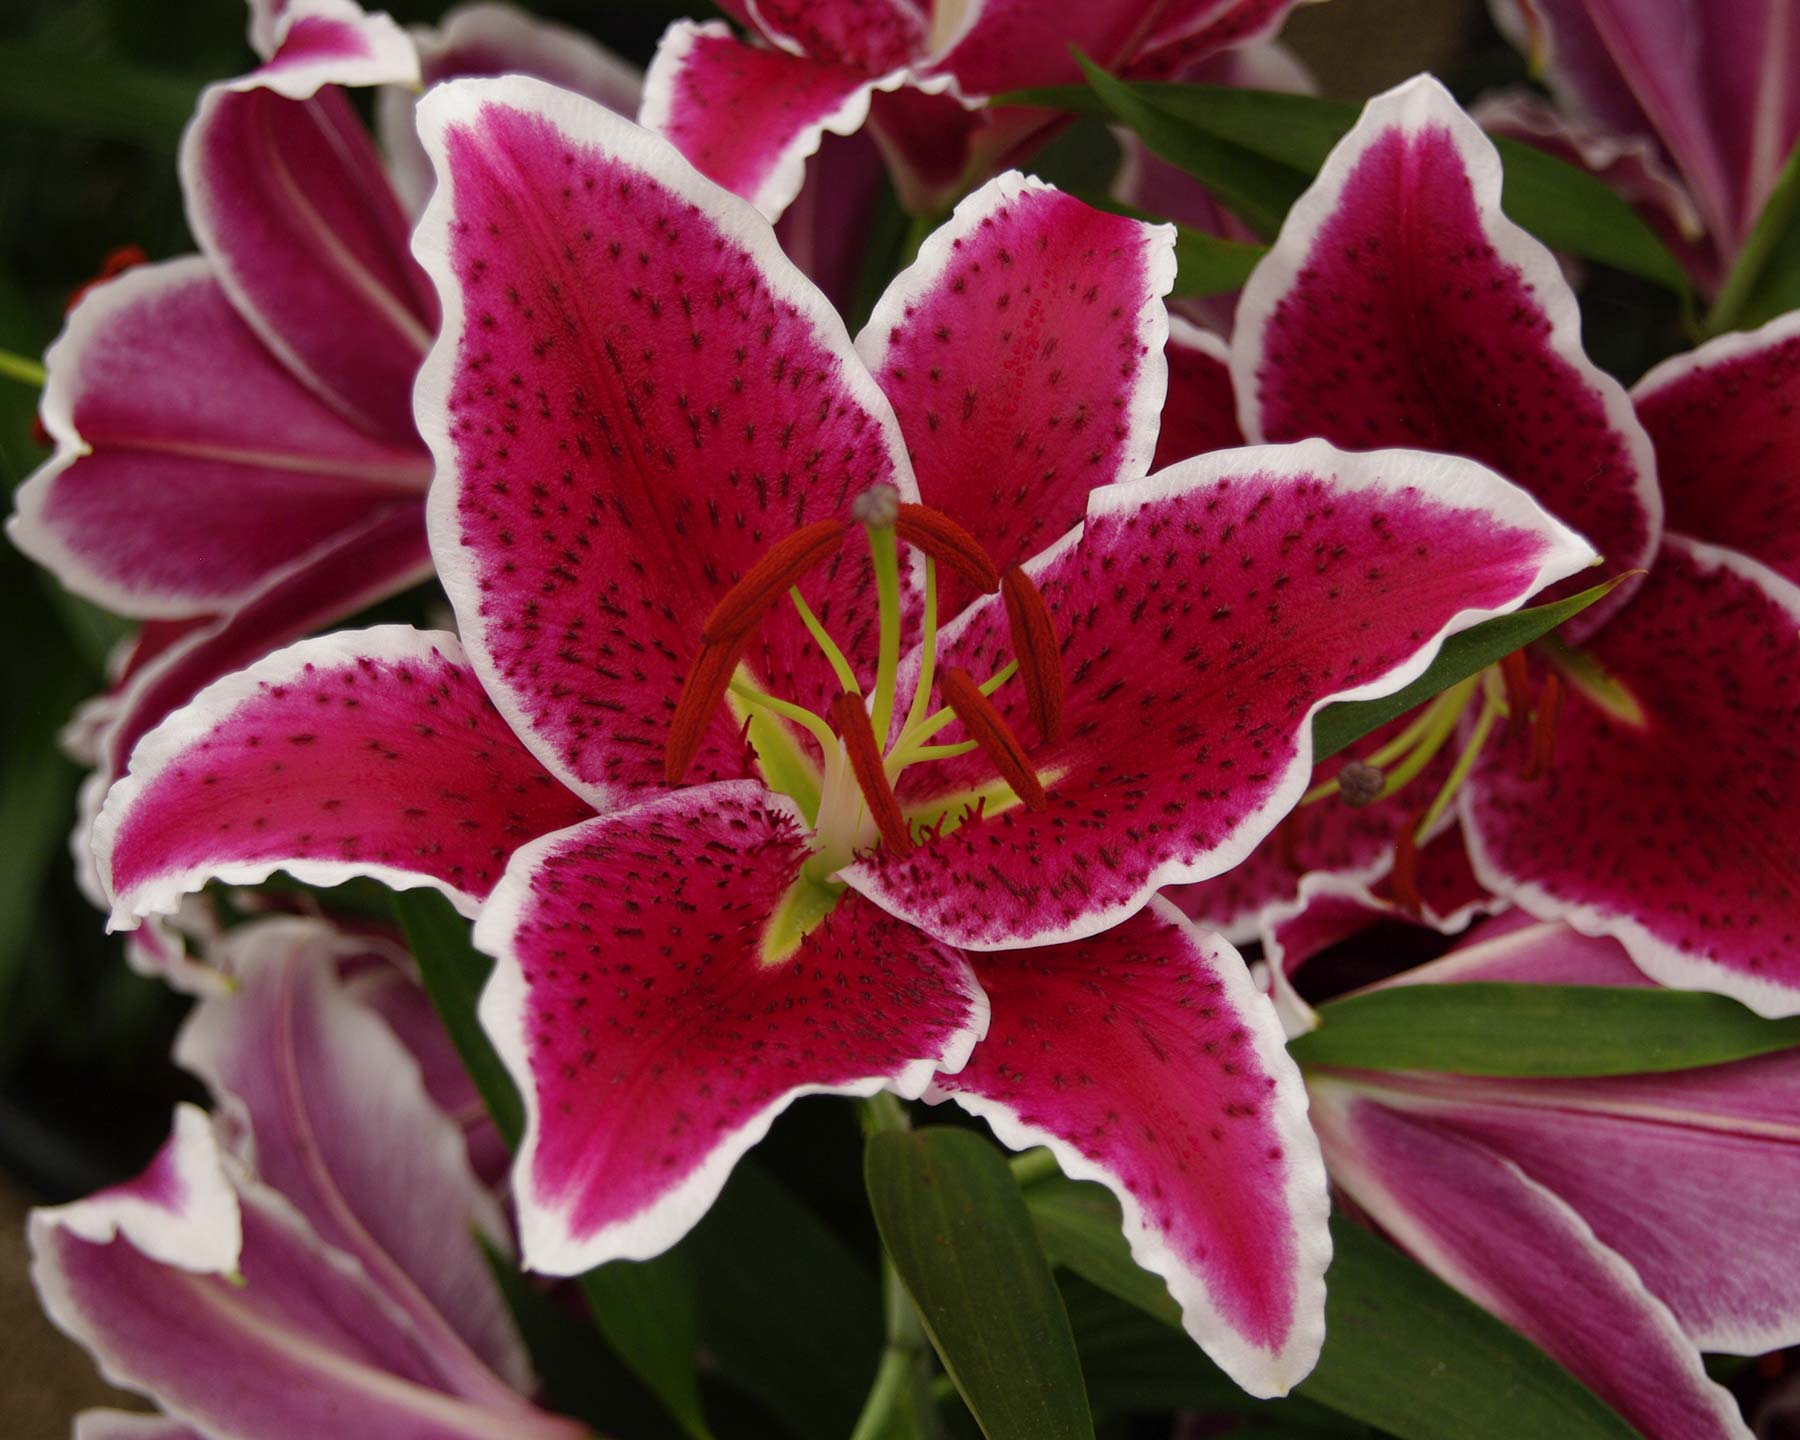 Lilium oriental hybrid - After Eight - Deep pink with white margin bowl shaped flowers - petals (tepals) marked with  black spots